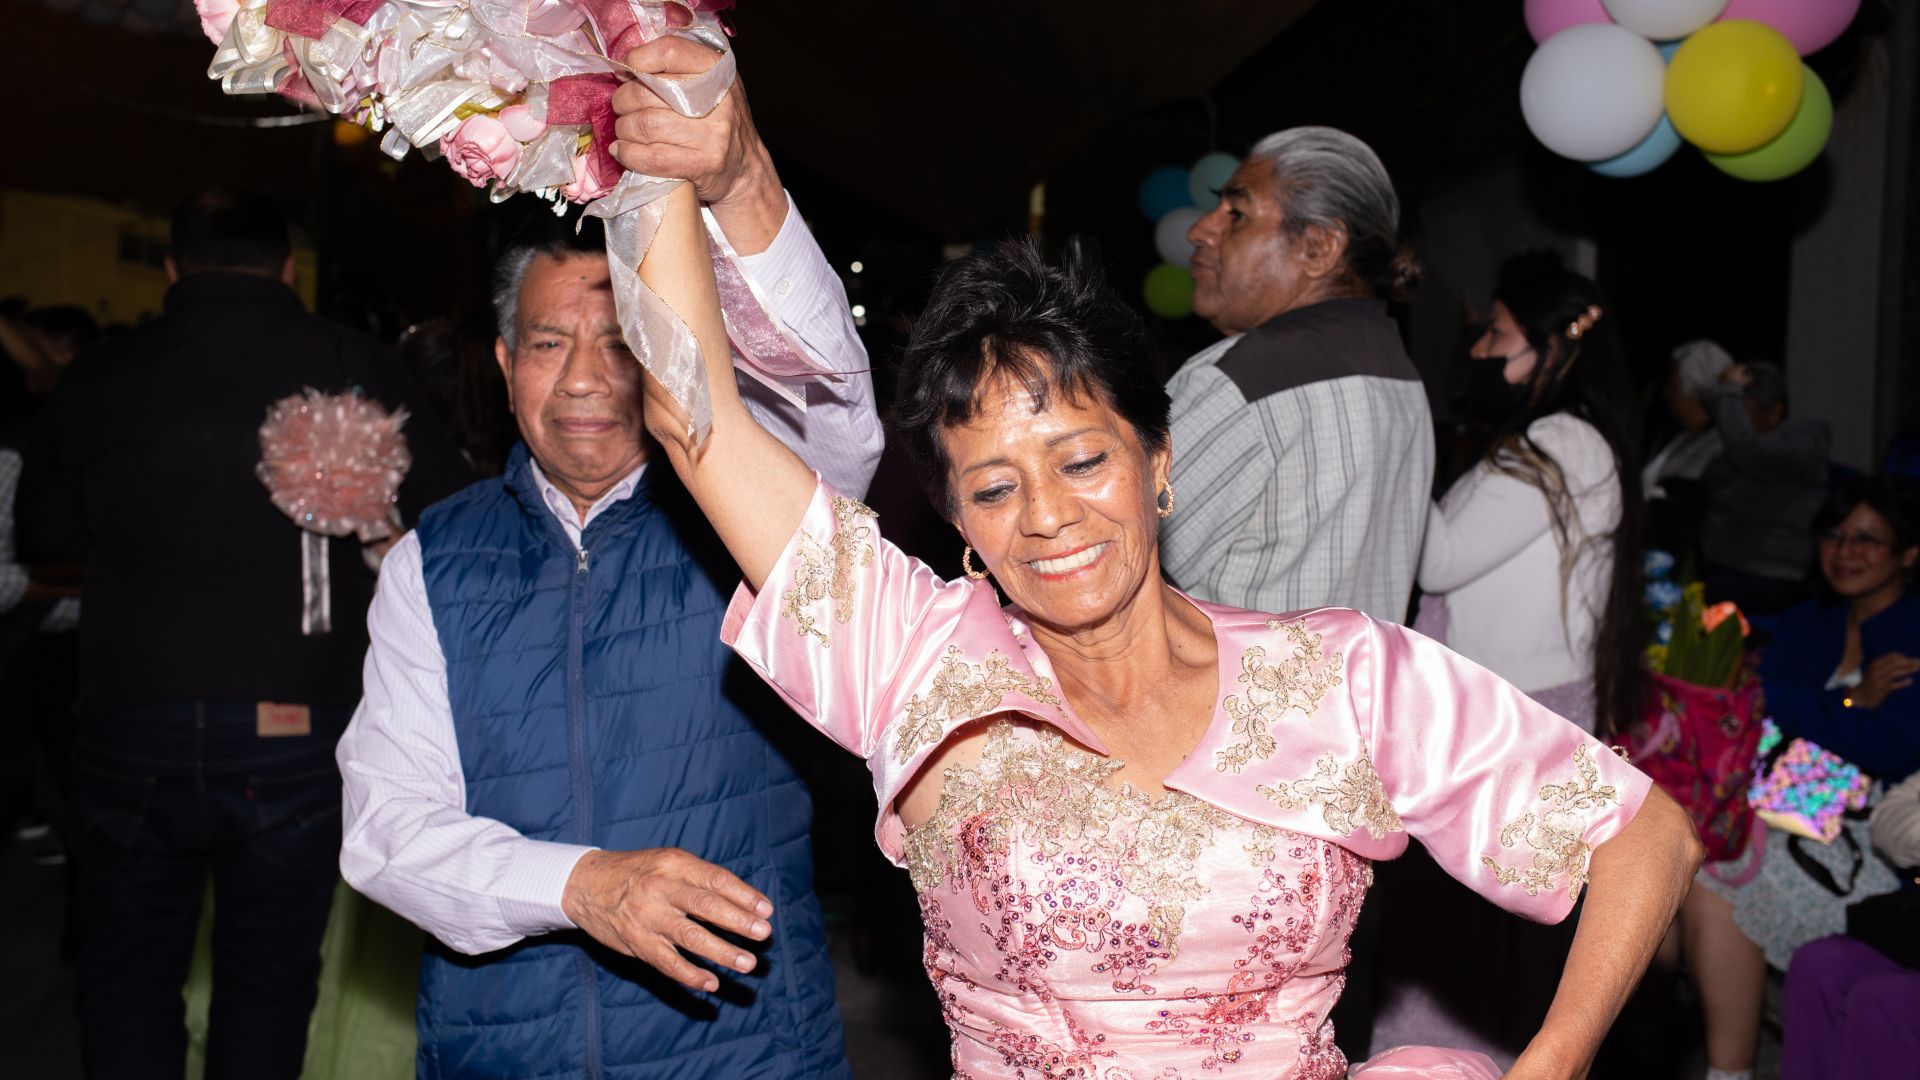 A woman in a pink dress is twirled by her dance partner, one arm lifted into the air as she perches the other on her hip.